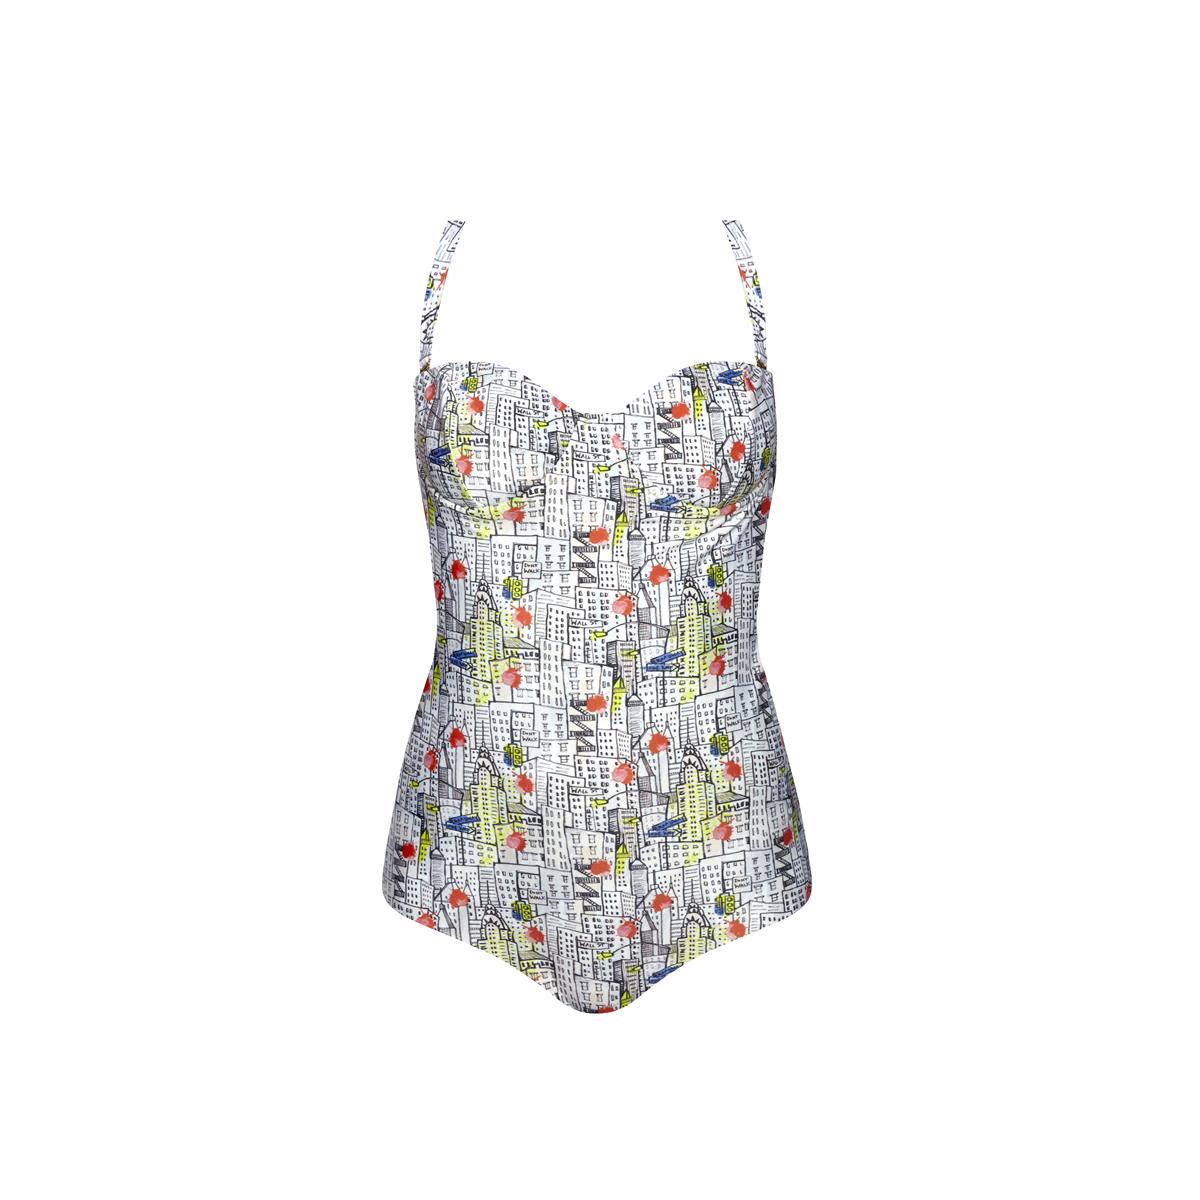 MARGARET AND HERMIONE_SS17_BANANA POP_Swimsuit3_EUR 209_new york